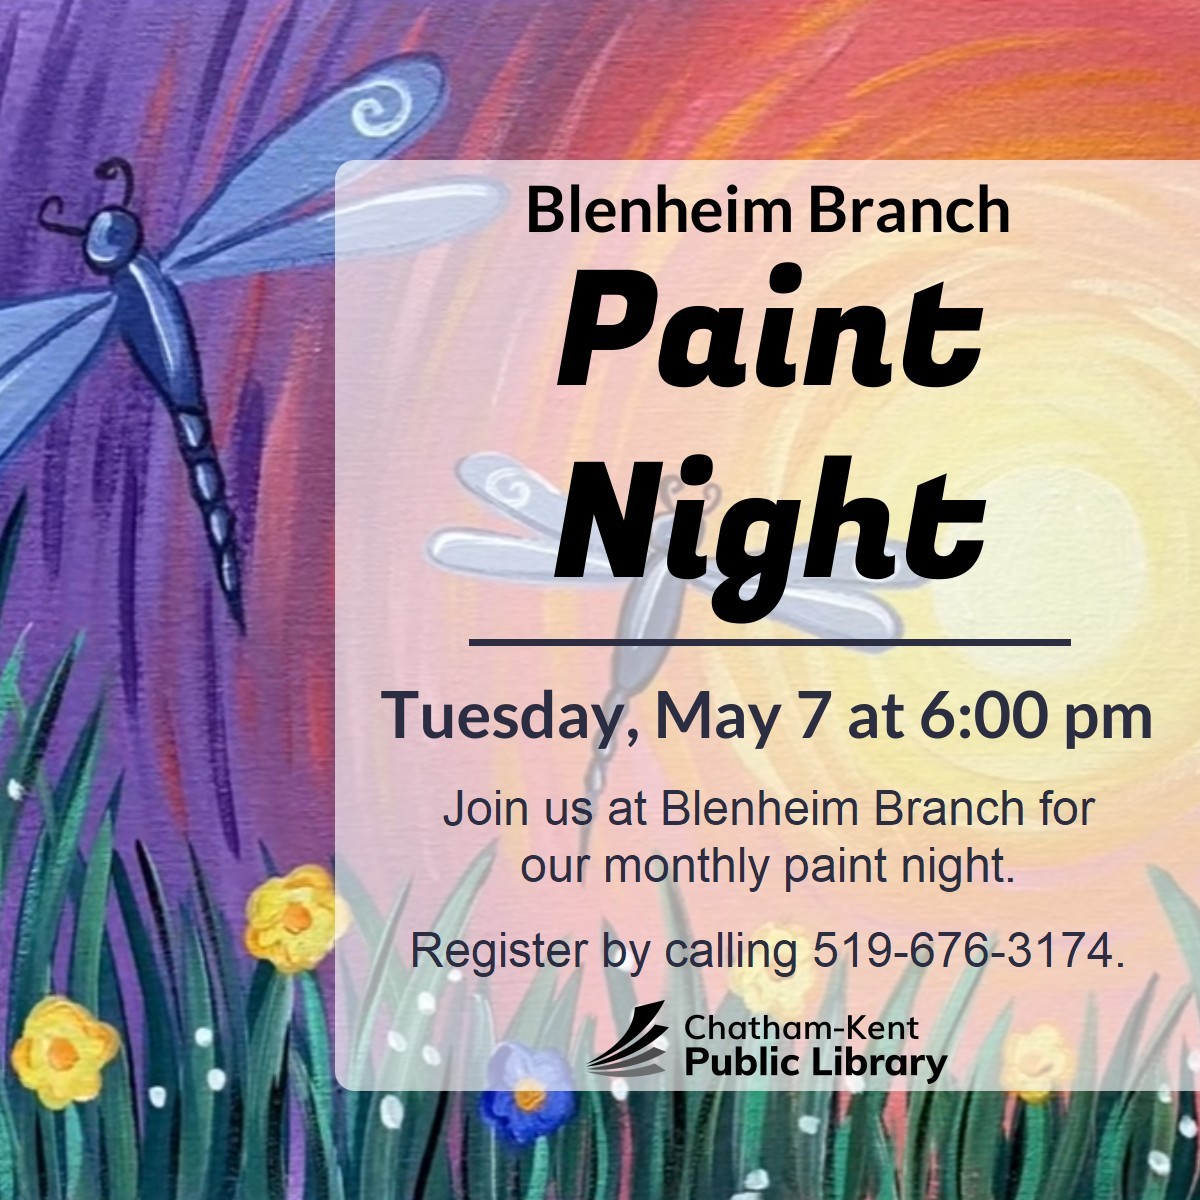 Join the Blenheim Branch of the Chatham-Kent Public Library for a free guided paint night on Tuesday, May 7 at 6pm. All materials required will be provided. Register by calling the Blenheim Branch at 519-676-3174.
#YourTVCK #TrulyLocal #CKont #CKPL #PaintNight